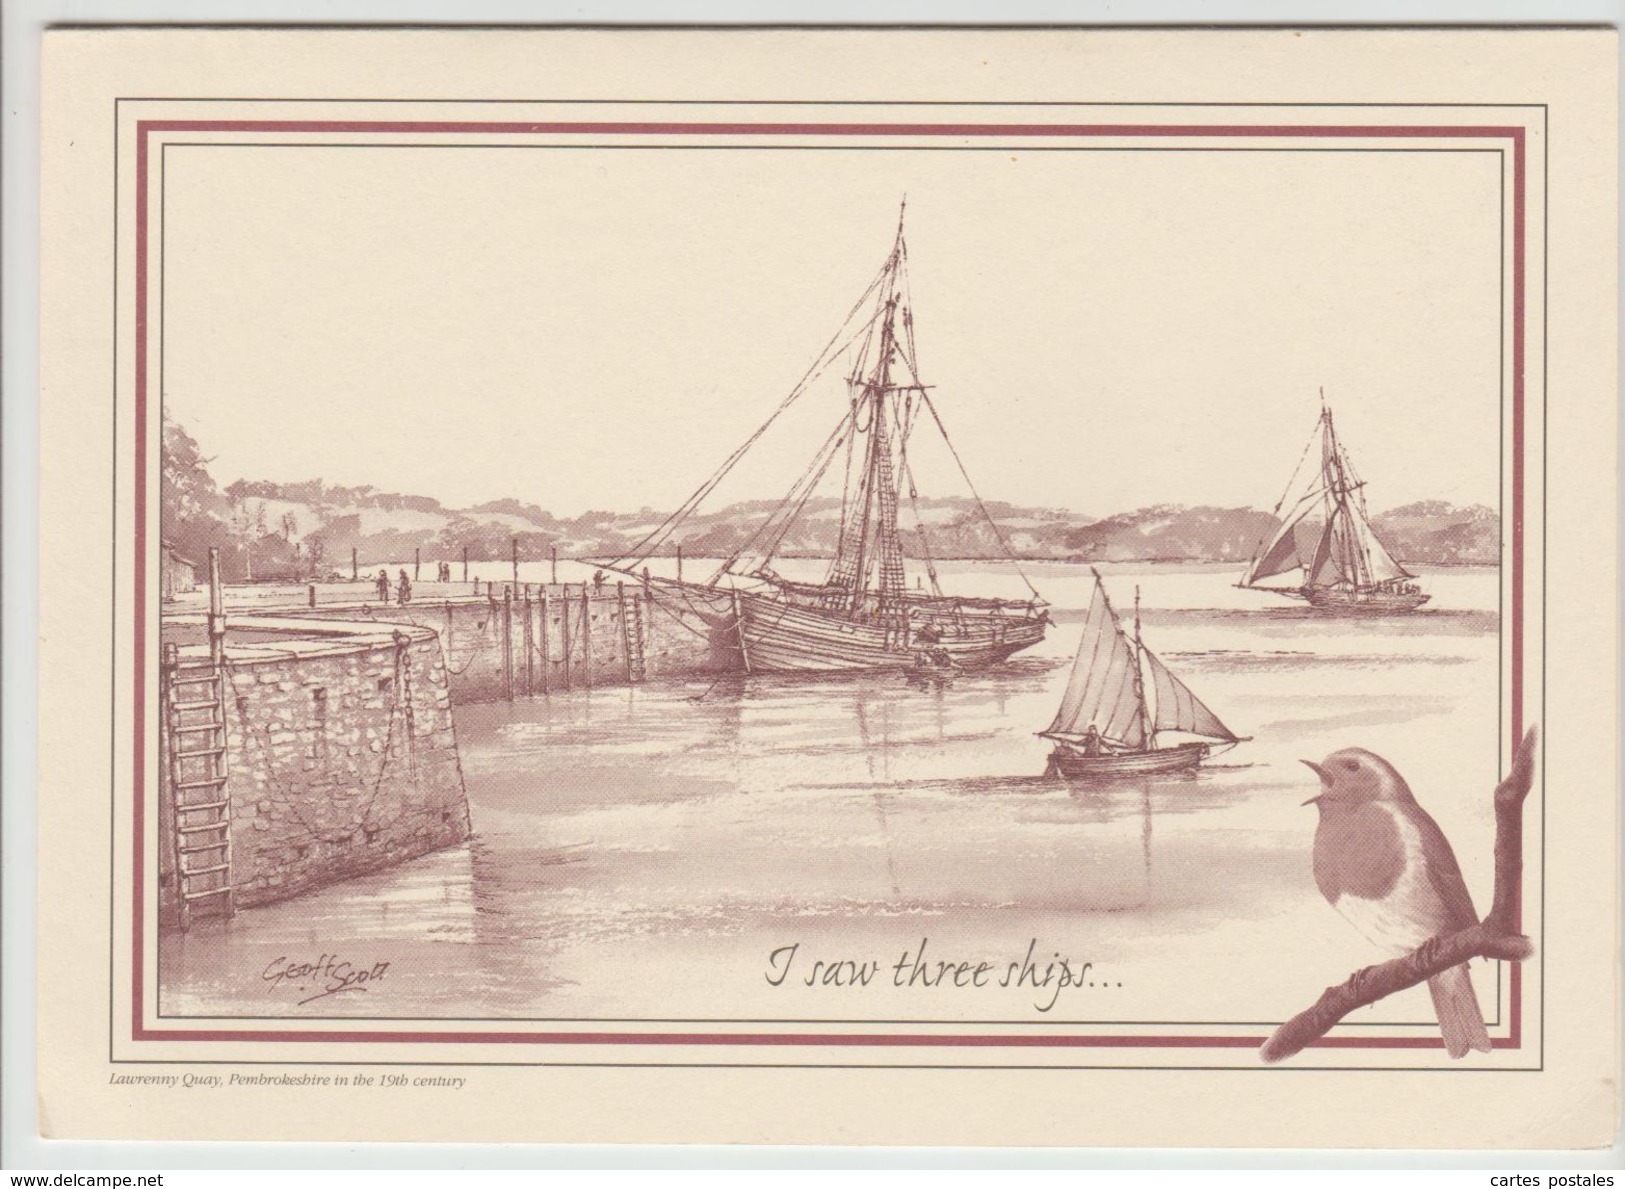 PEMBROKESHIRE Laurenny Quay In The 19th Century  Isaw Three Ships - Pembrokeshire